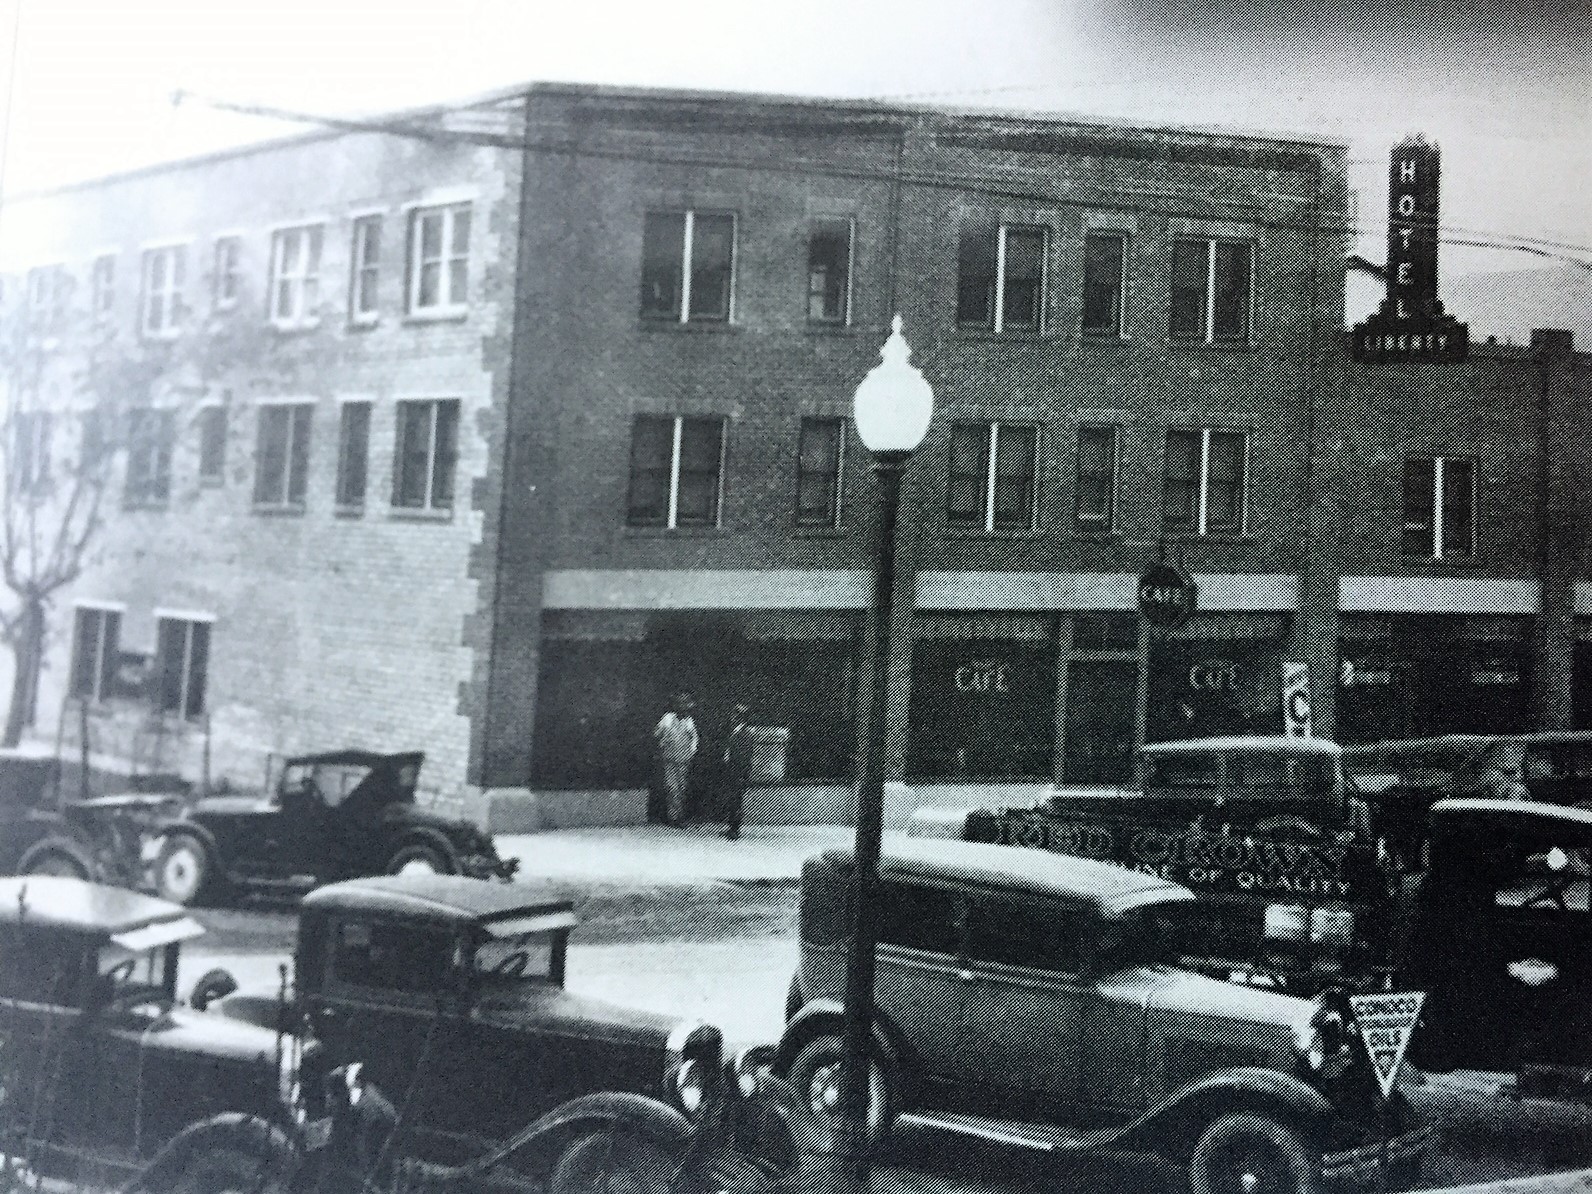 North and east sides of the Liberty Hotel in St. George in the 1930s